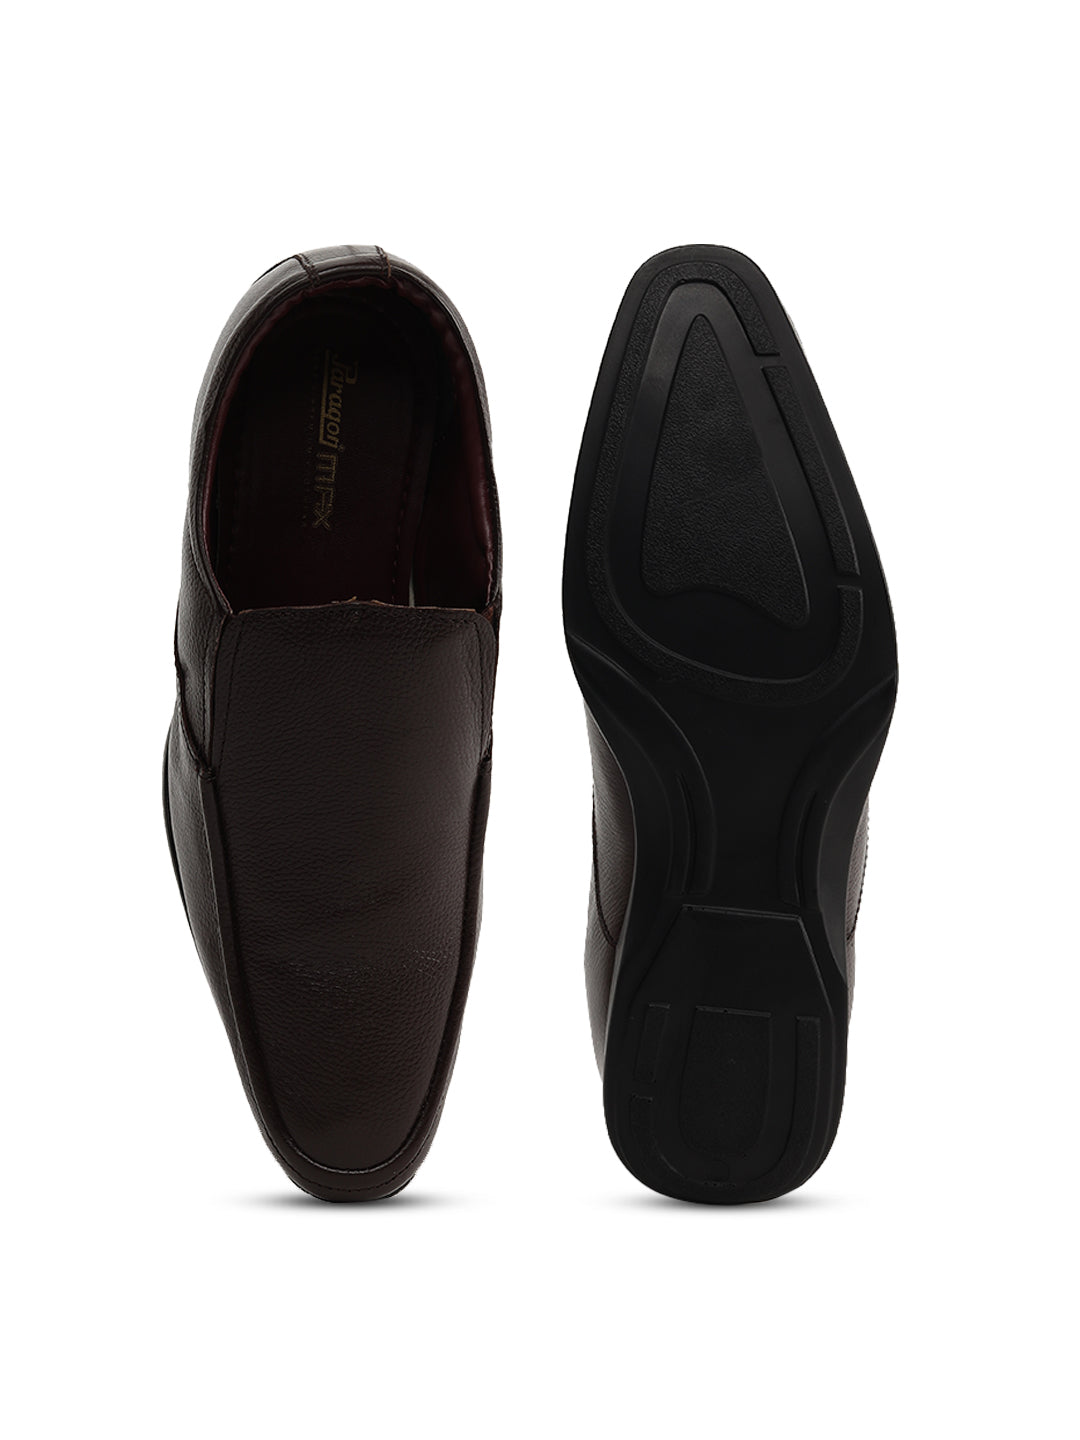 Paragon RL9801G Men Formal Shoes | Corporate Office Shoes | Smart &amp; Sleek Design | Comfortable Sole with Cushioning | Daily &amp; Occasion Wear